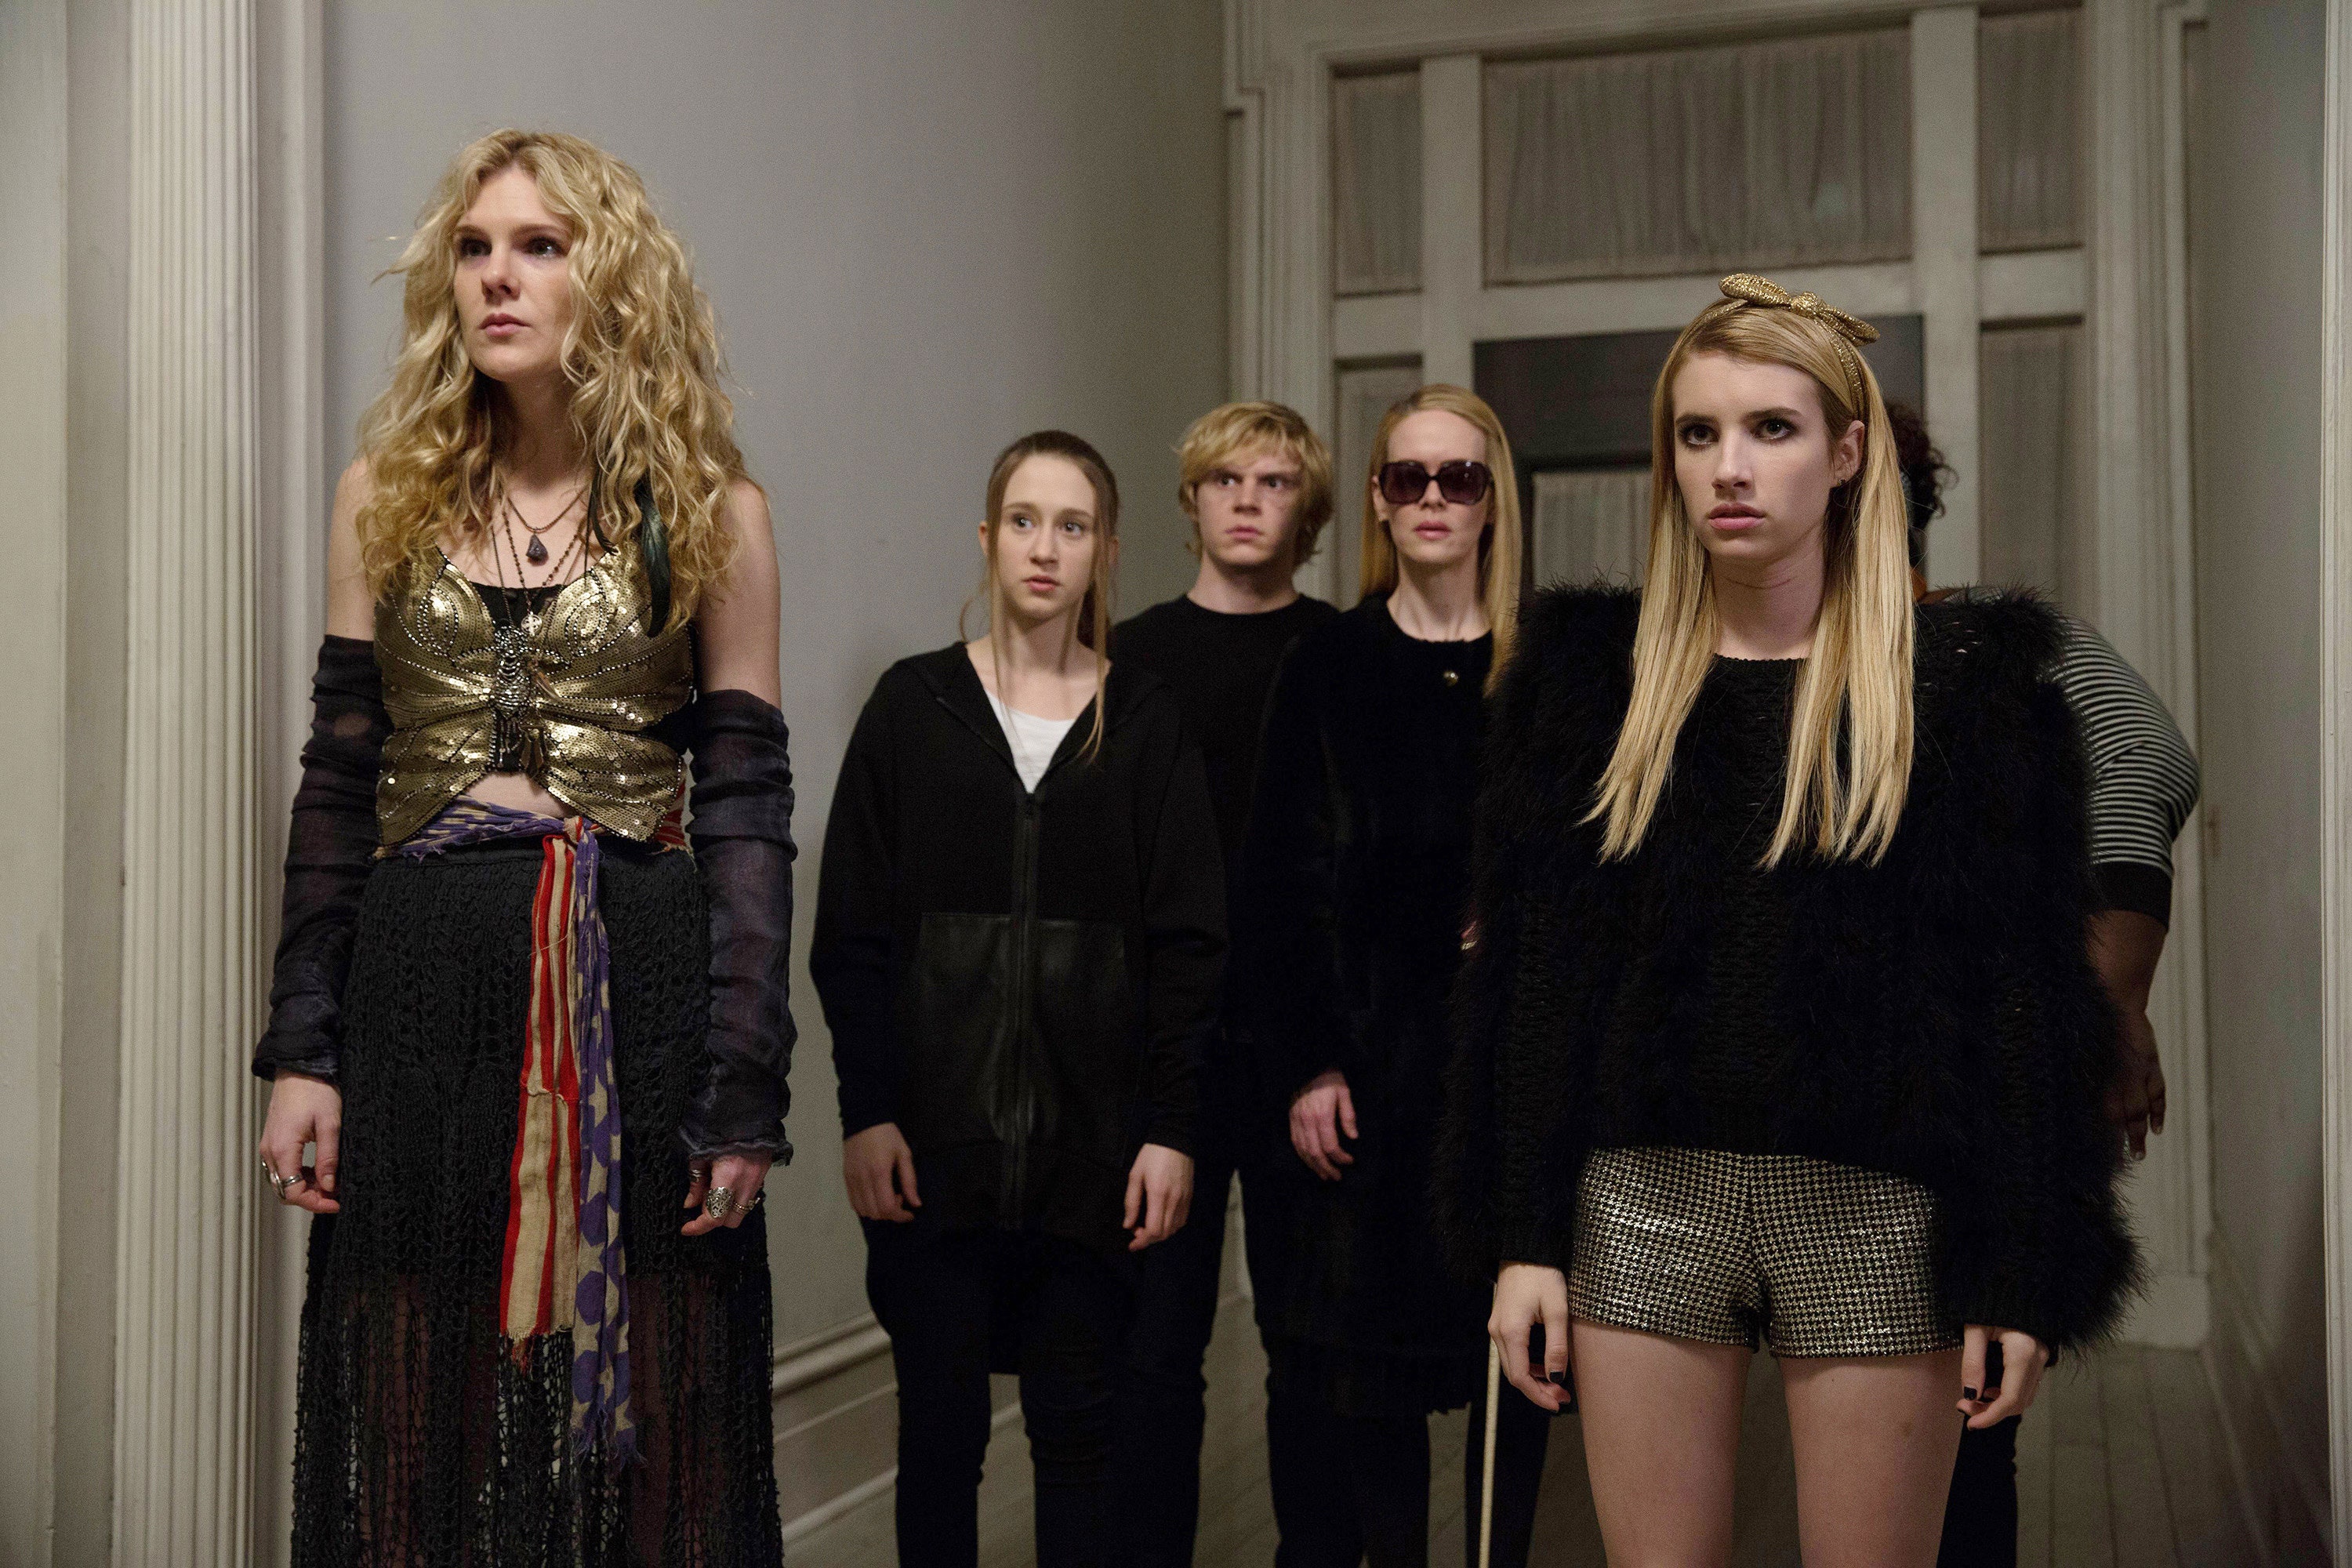 First American Horror Story: Apocalypse Photo of the Reunited Coven Features Sarah Paulson, Emma Roberts, and More